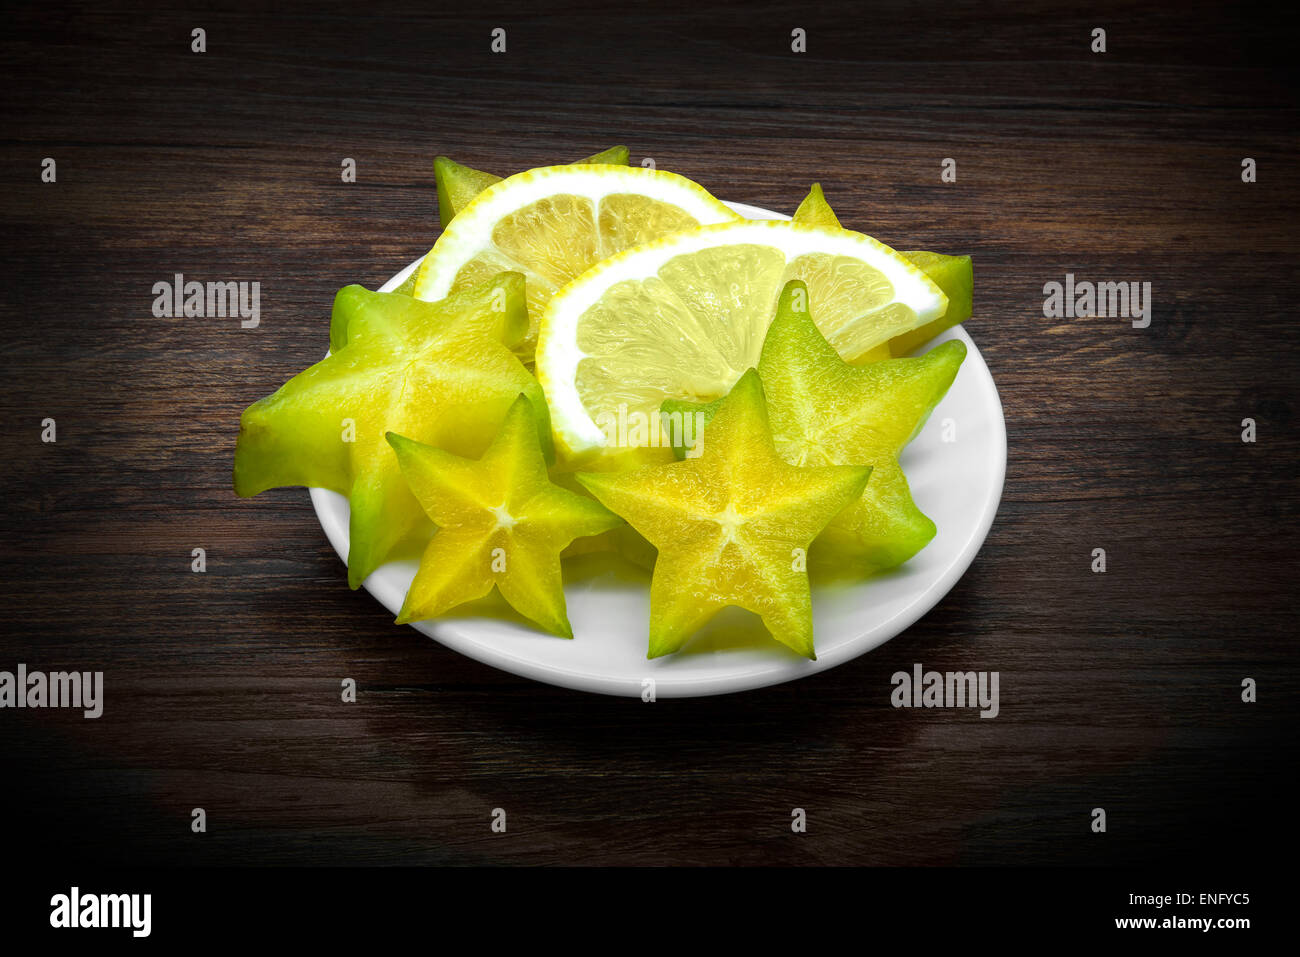 Carambola and lemon on dark brown wooden background. Stock Photo